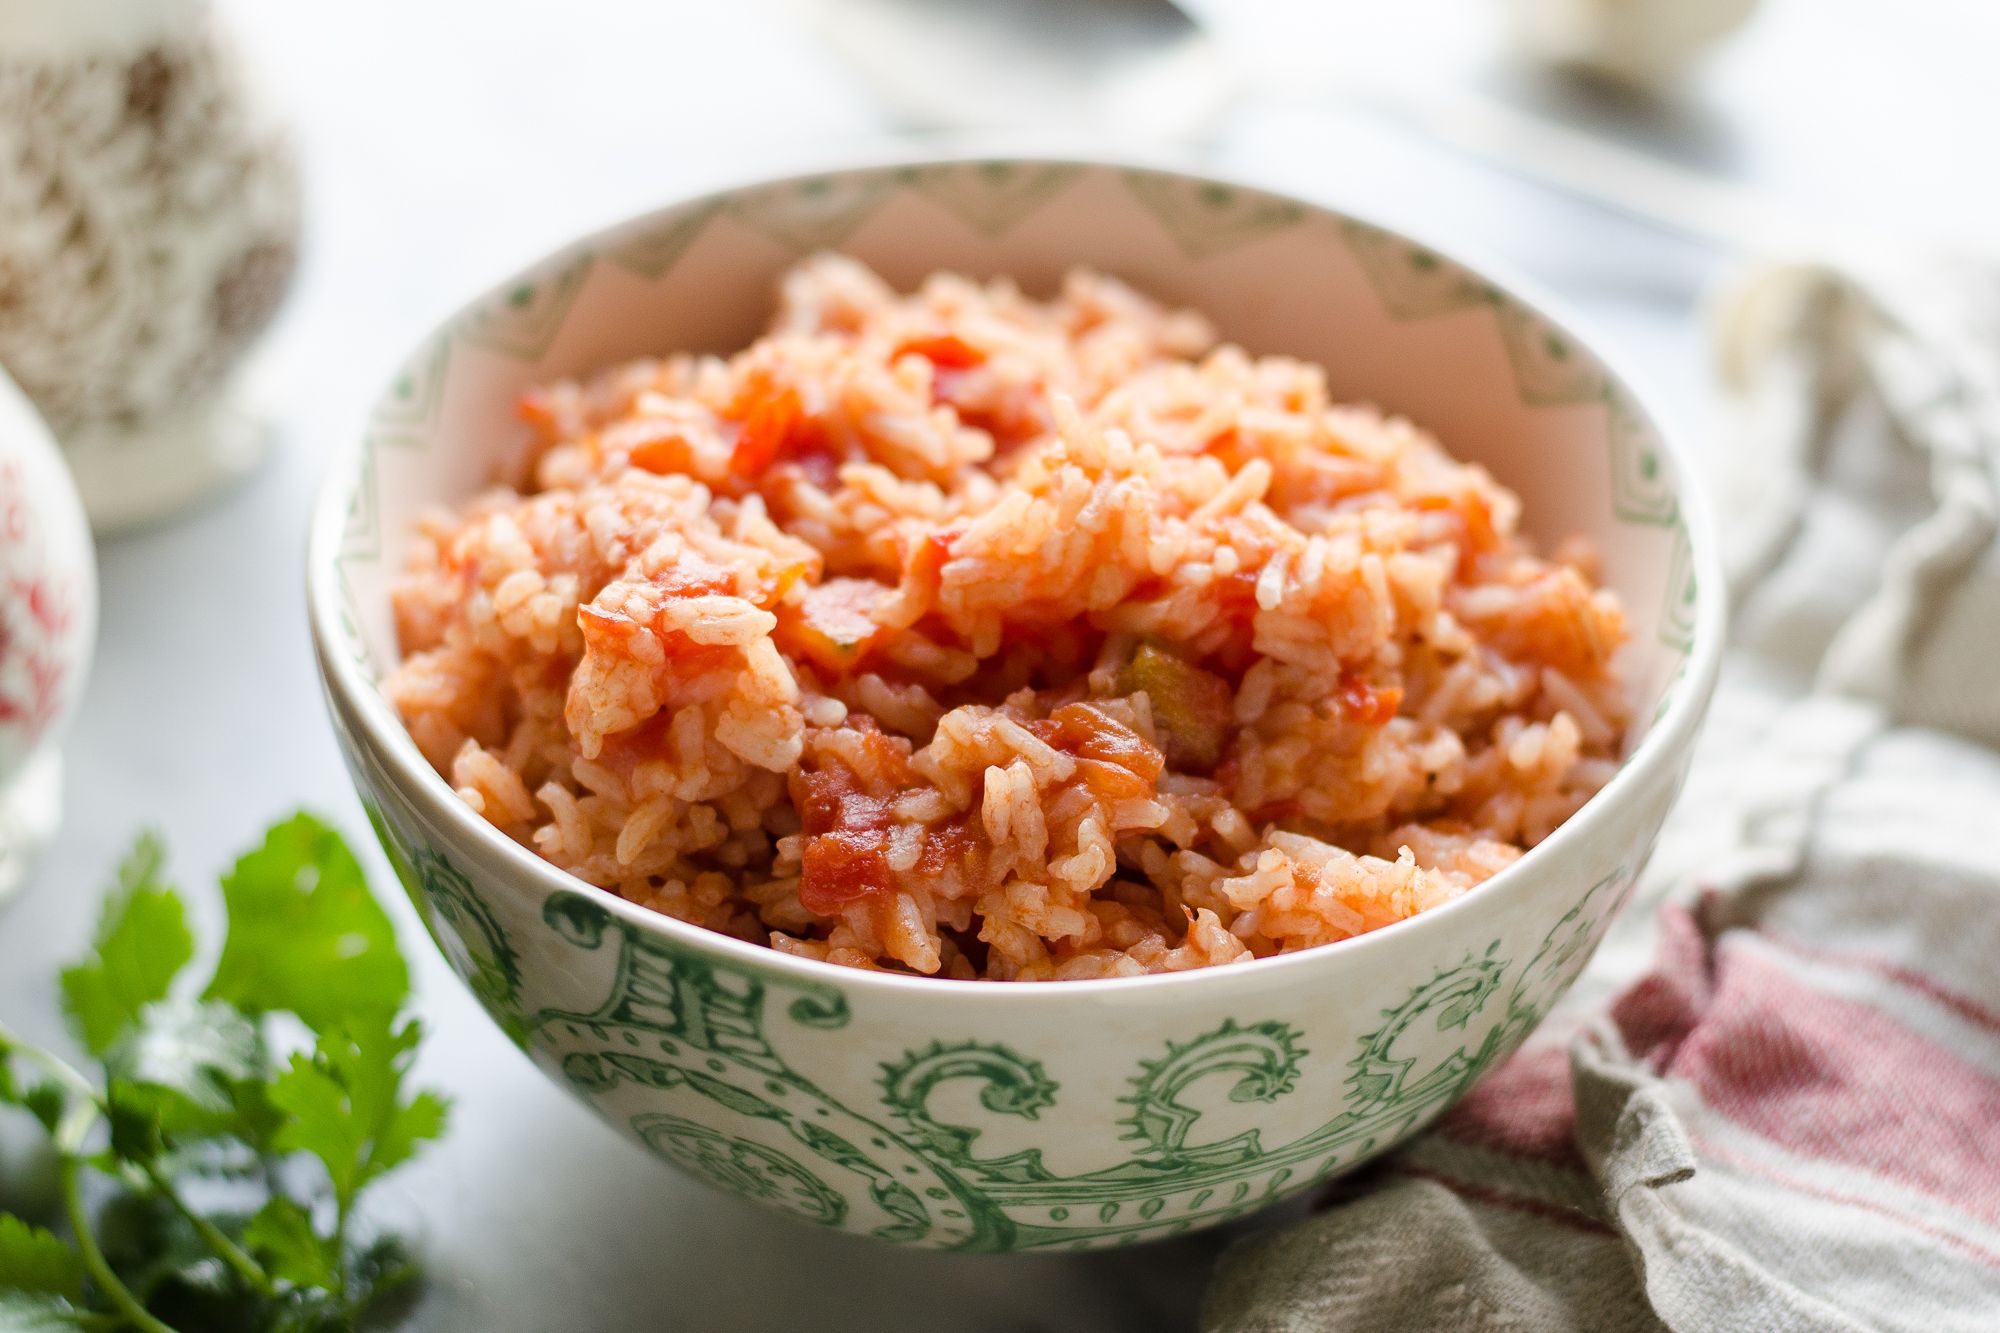 How to Make Steamed Rice without Rice Cooker 米飯